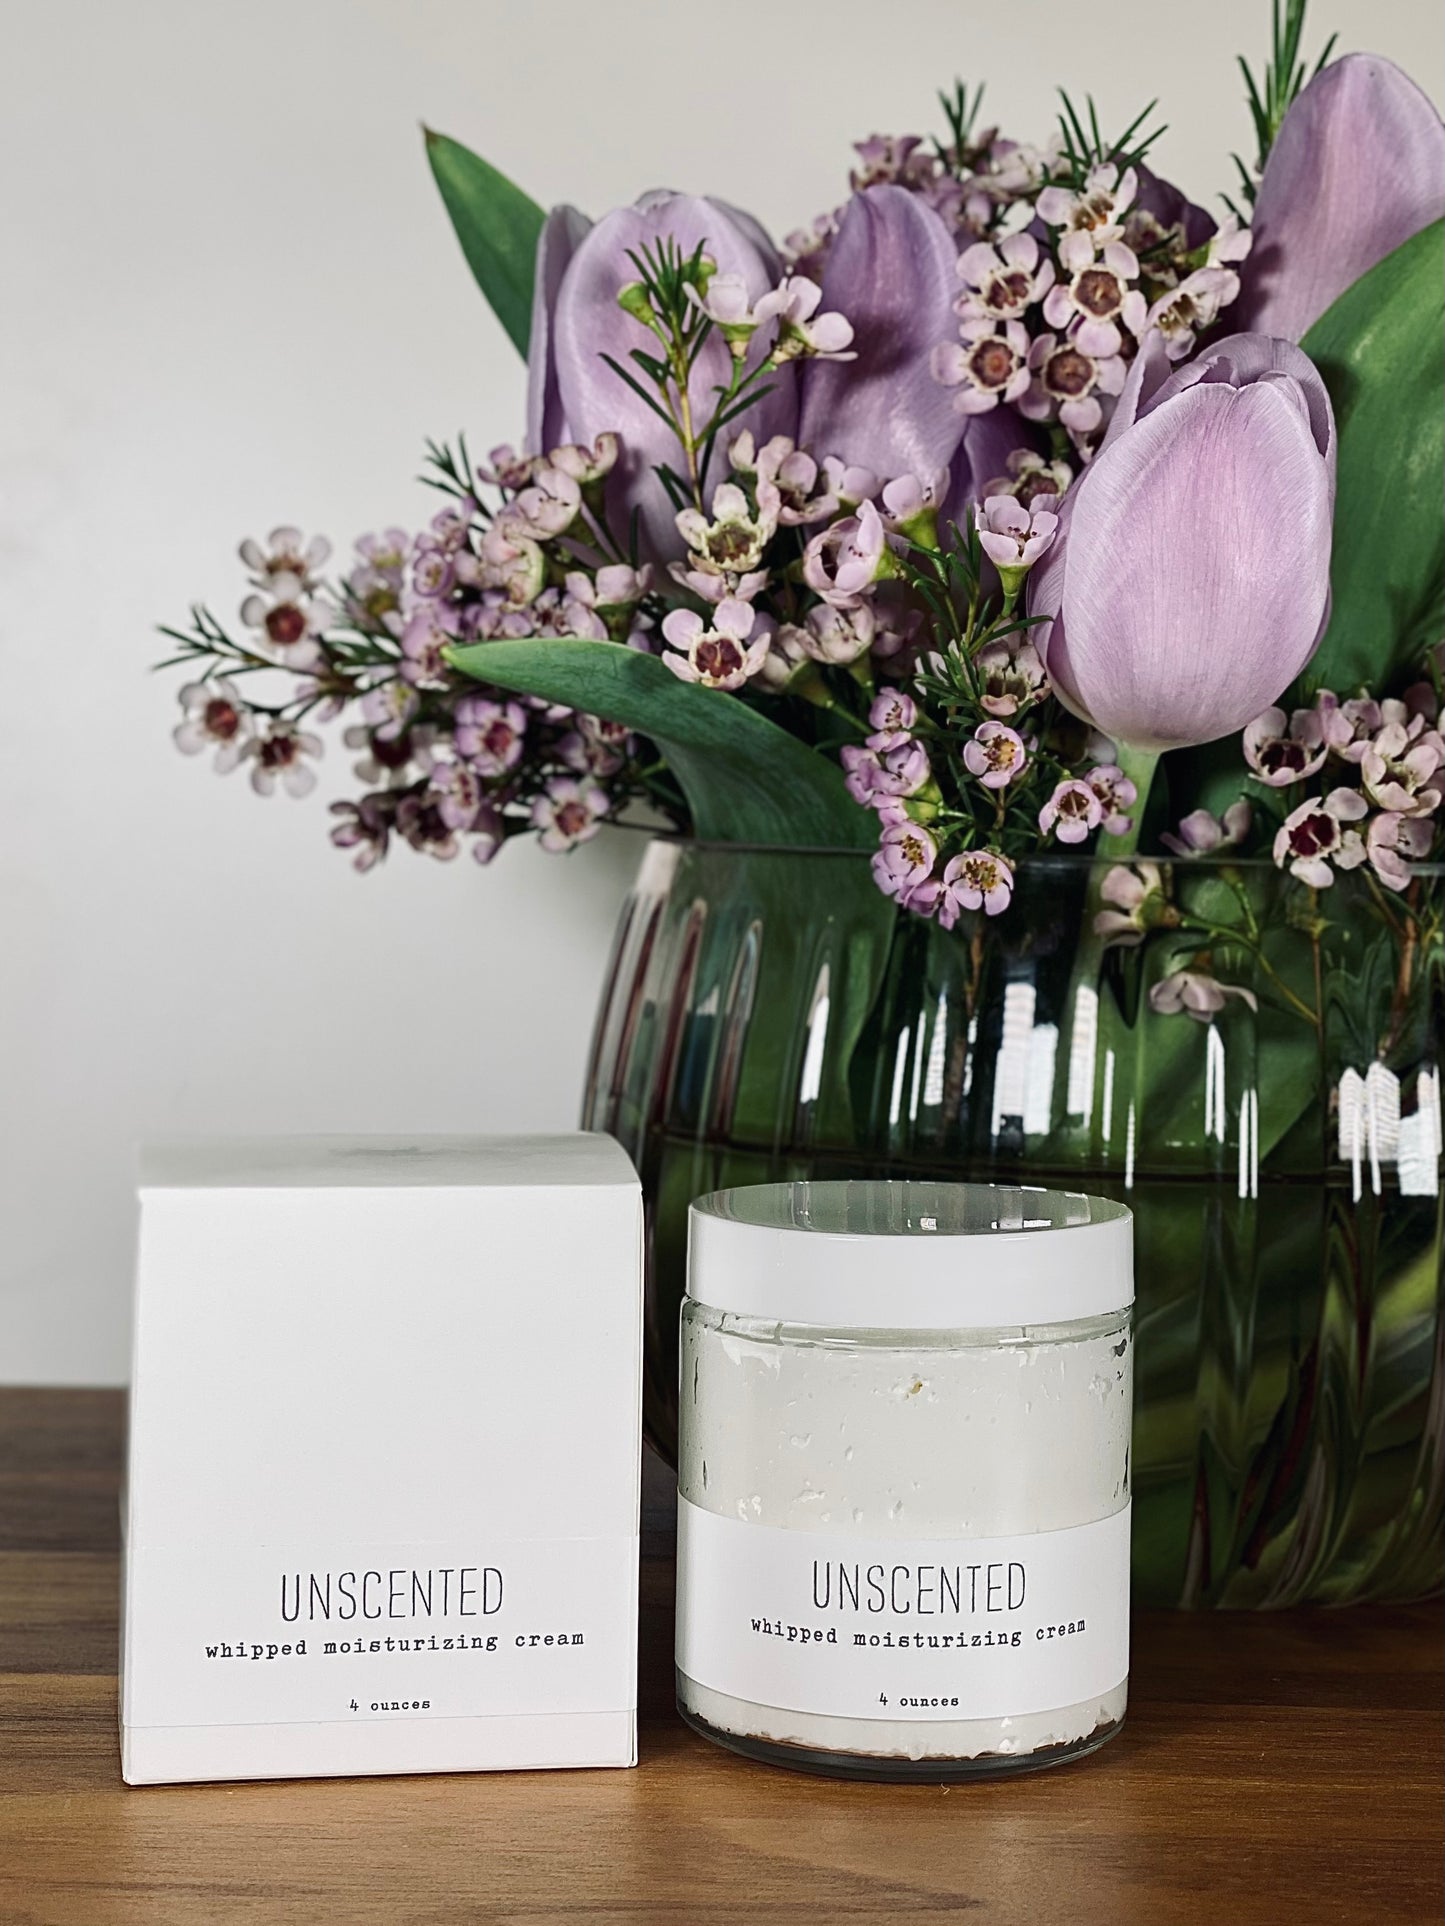 Whipped Moisturizing Cream - UNSCENTED